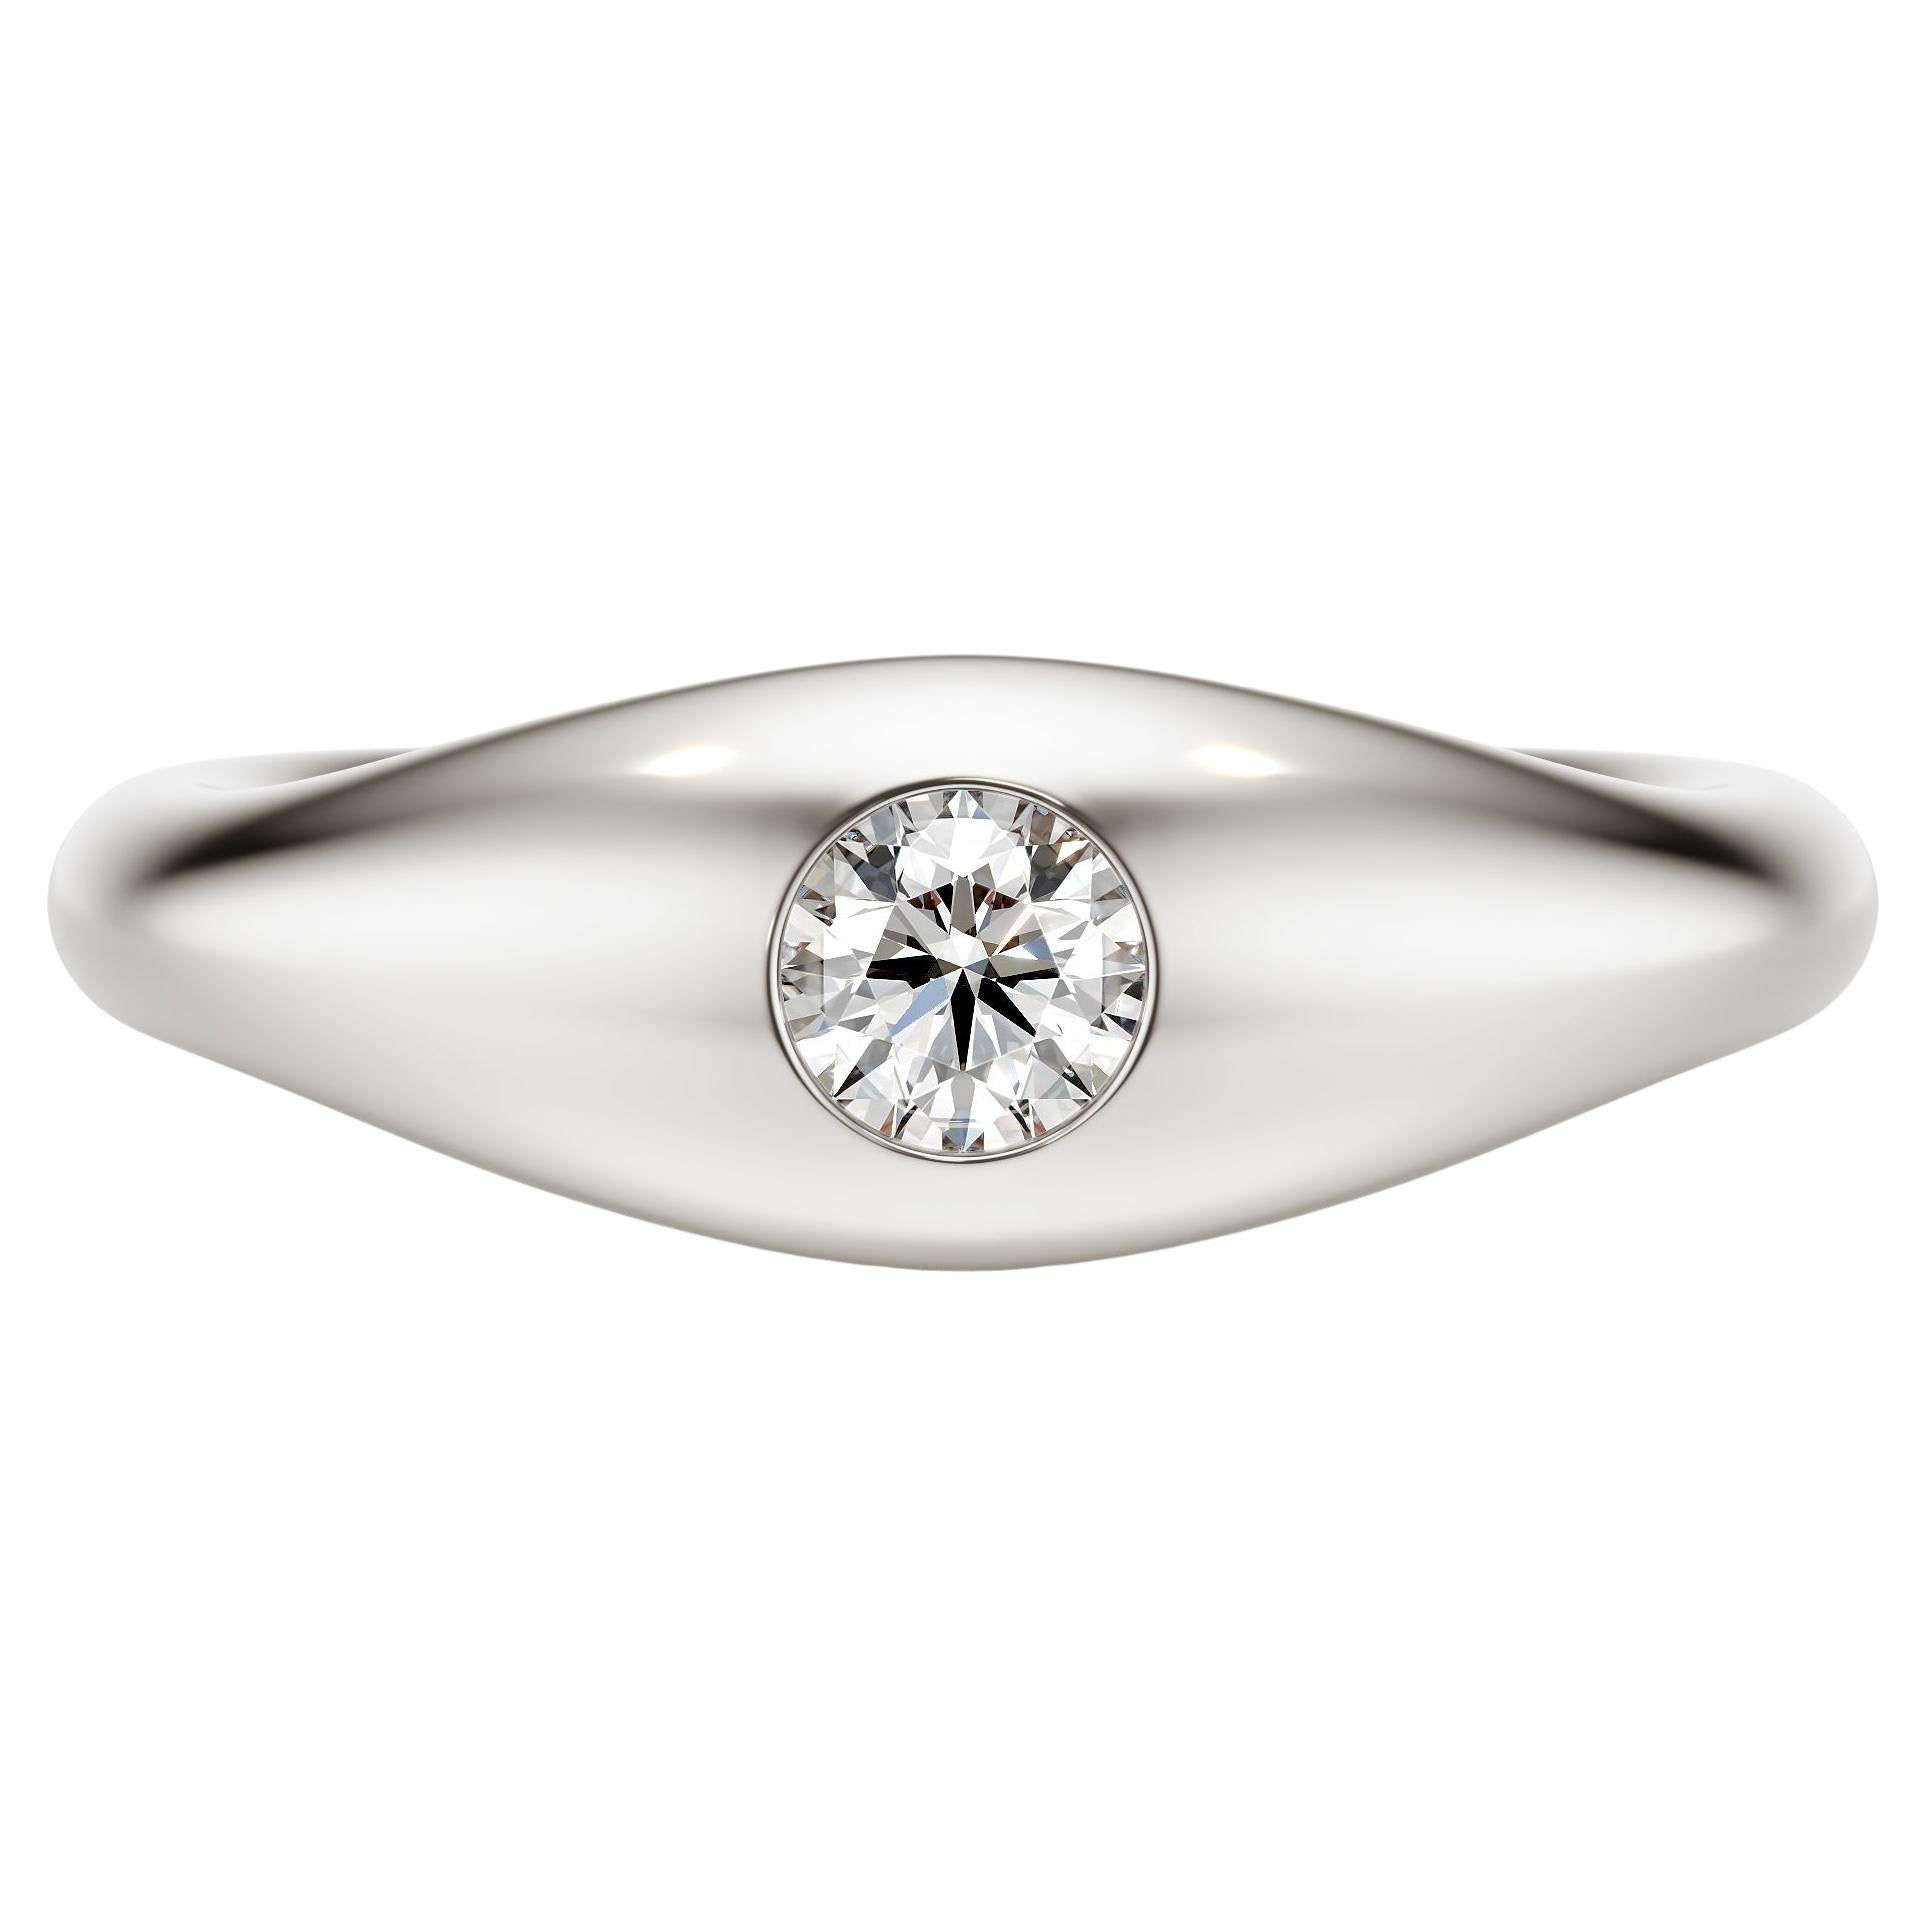 For Sale:  Ruth Nyc Lun Ring, 14k White Gold and Diamond